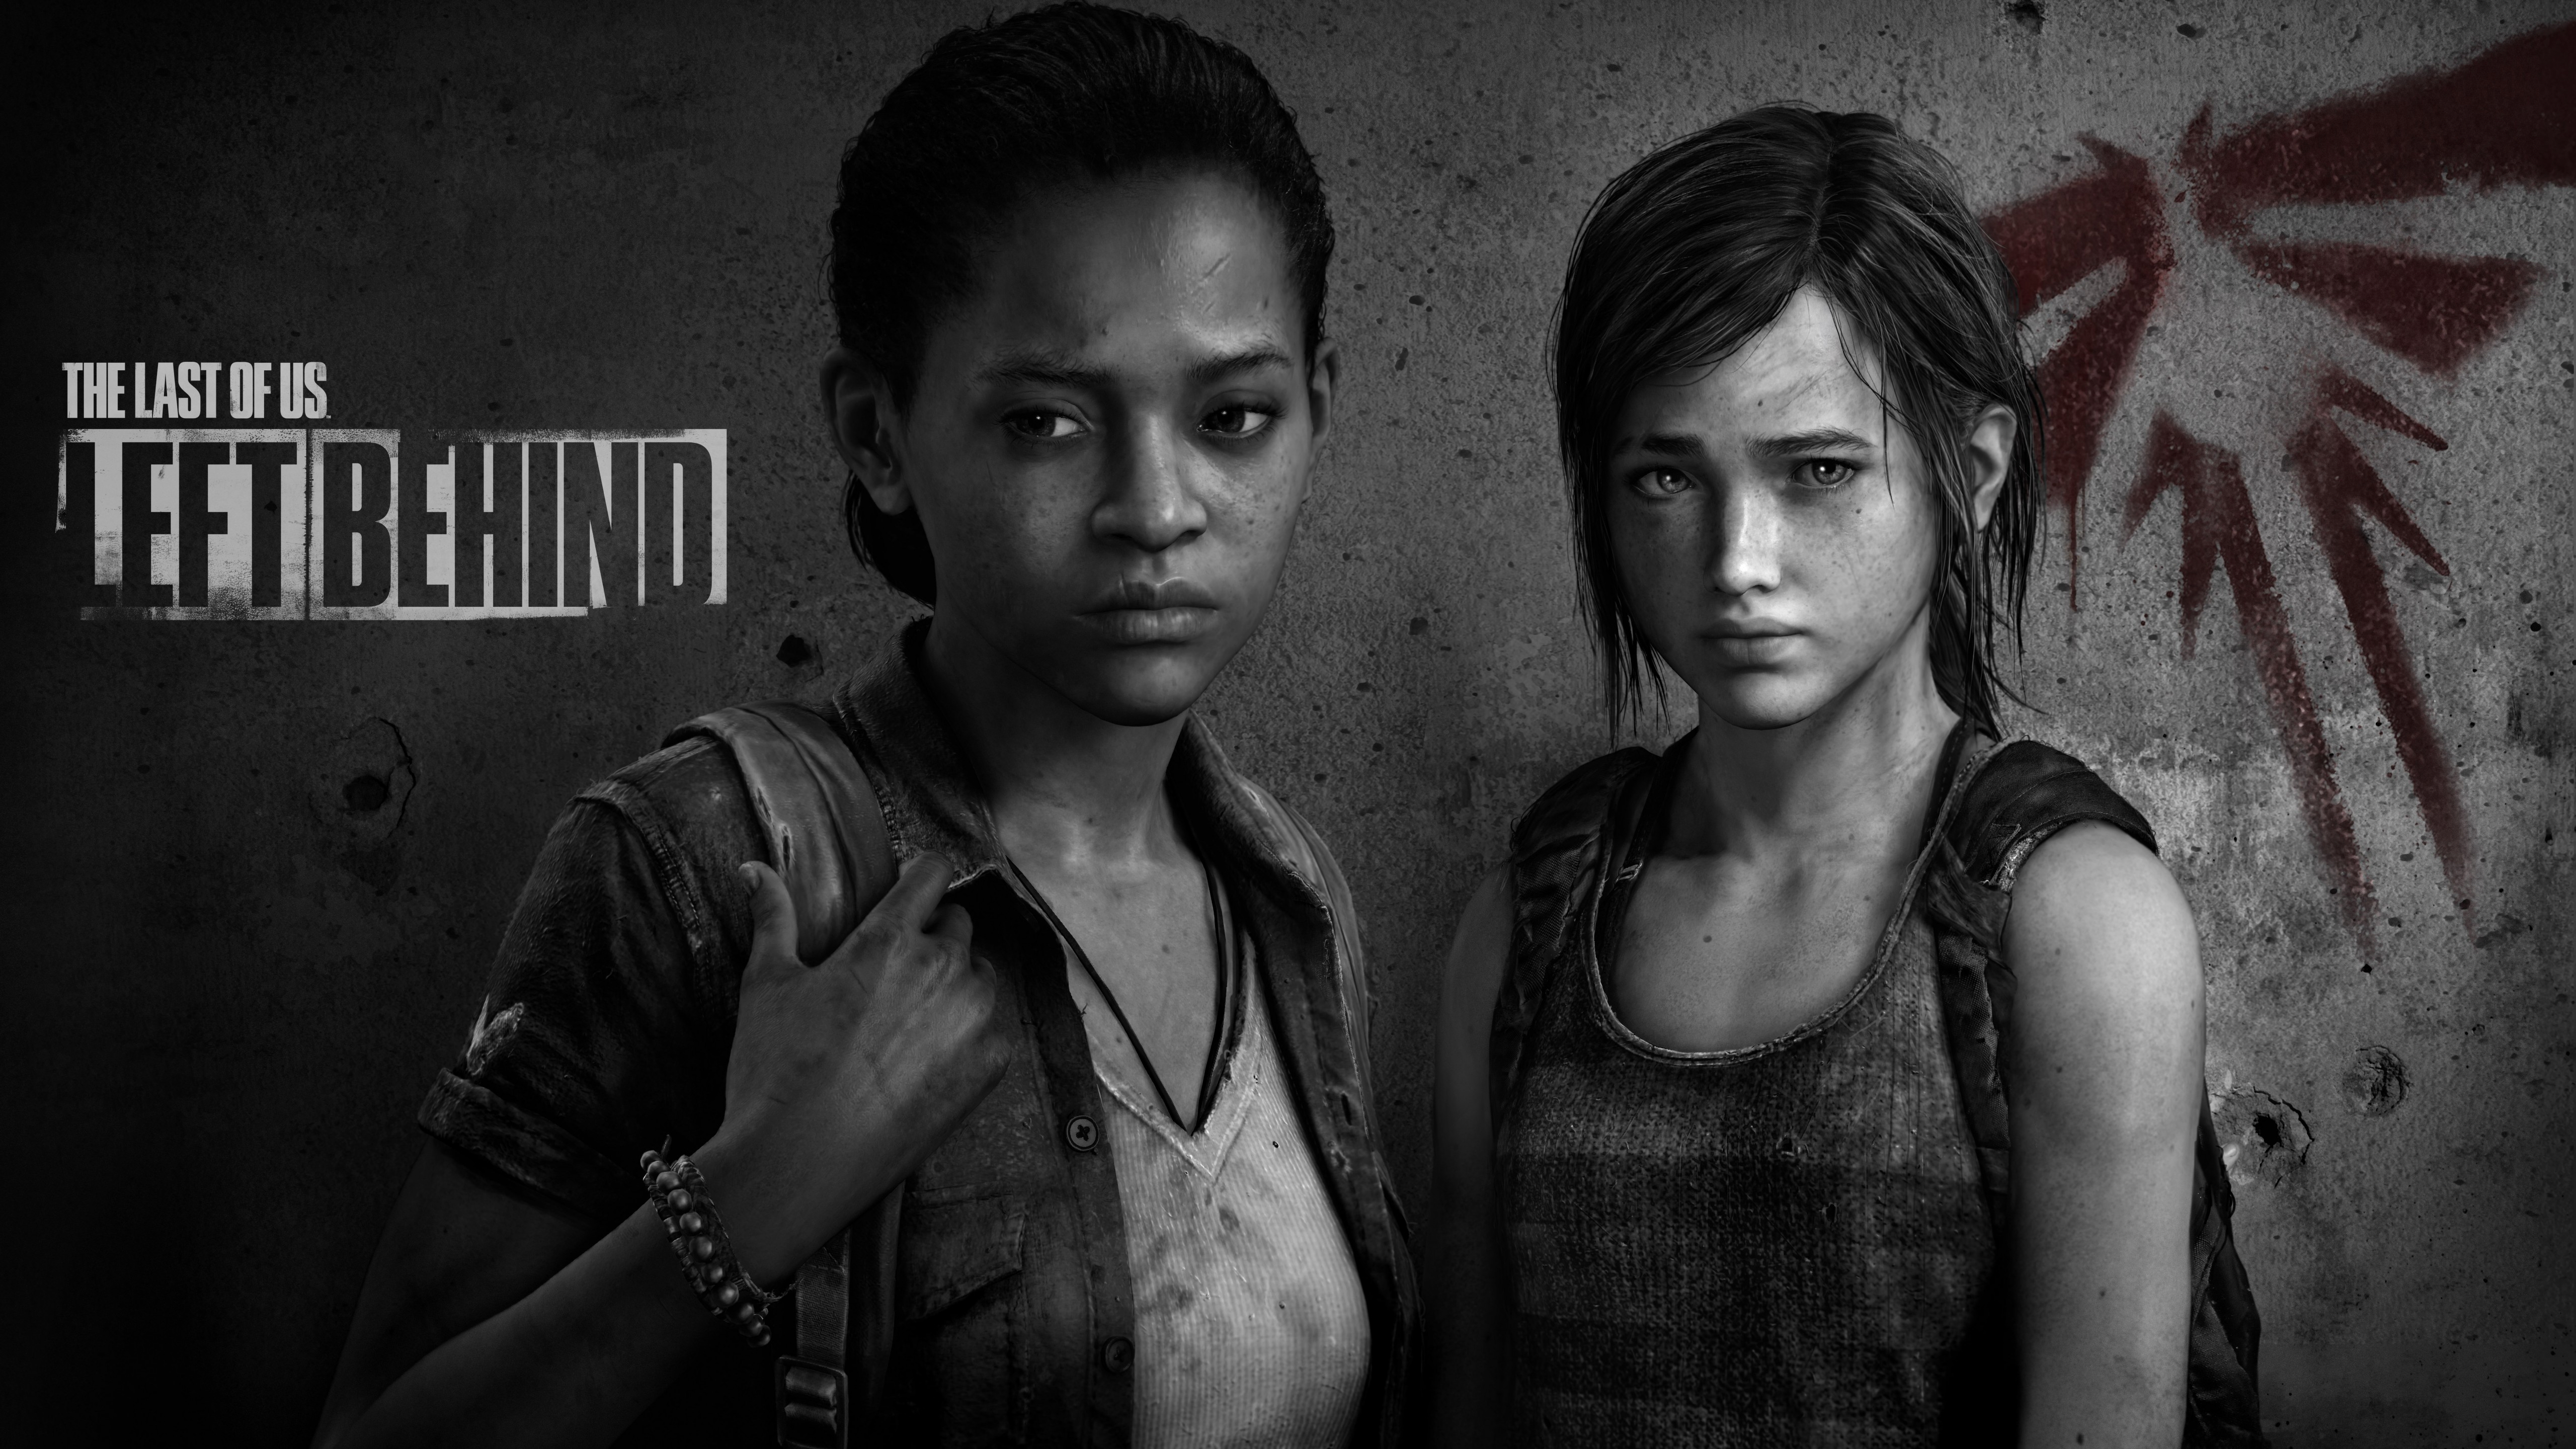 General 5120x2880 The Last of Us video games dark The Last of Us Left Behind Riley (The Last of Us) Ellie Williams video game characters Naughty Dog